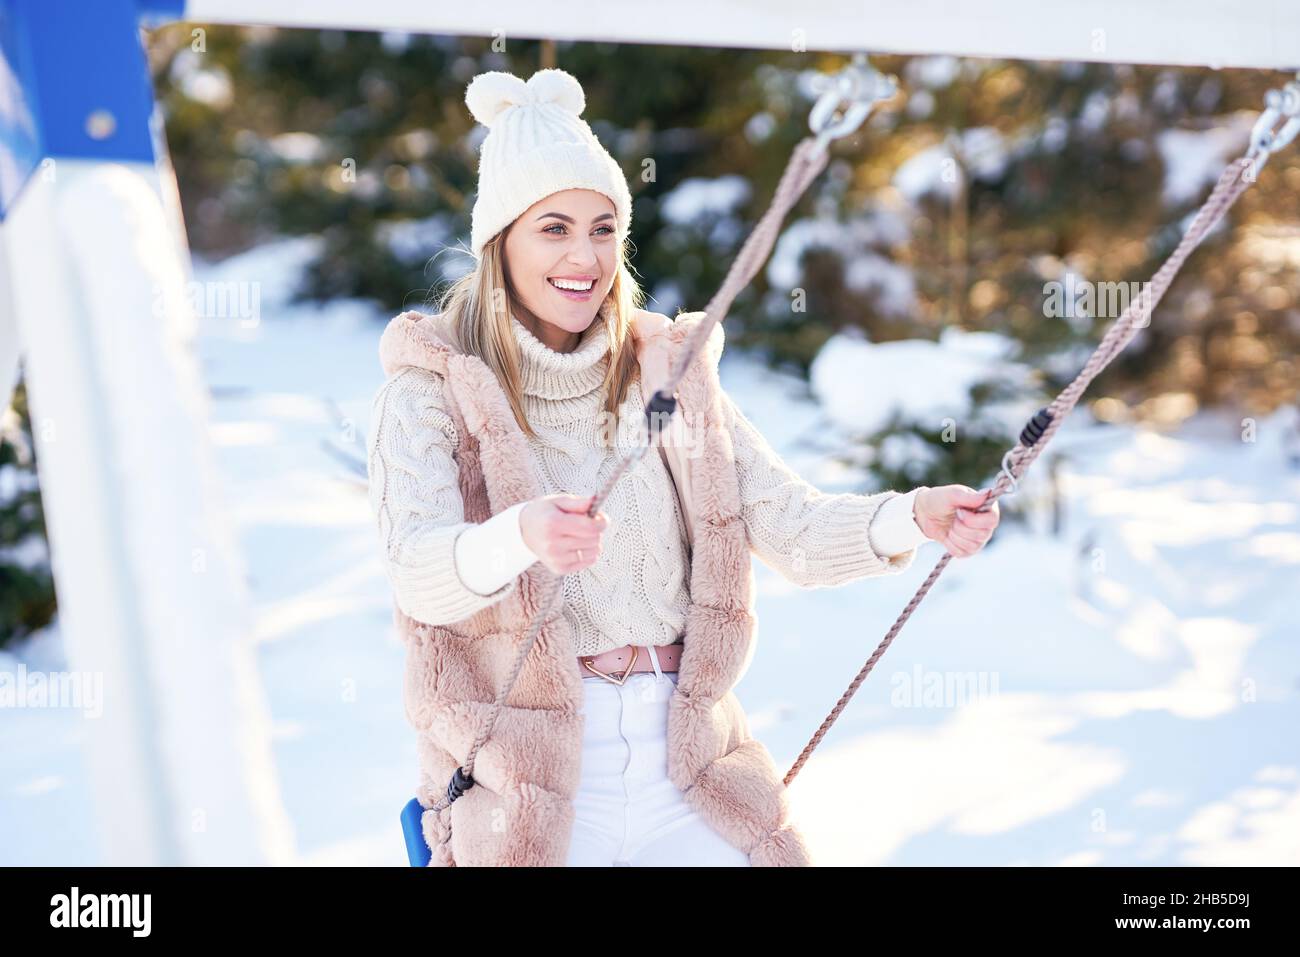 Nice young happy woman in winter scenery on swing Stock Photo